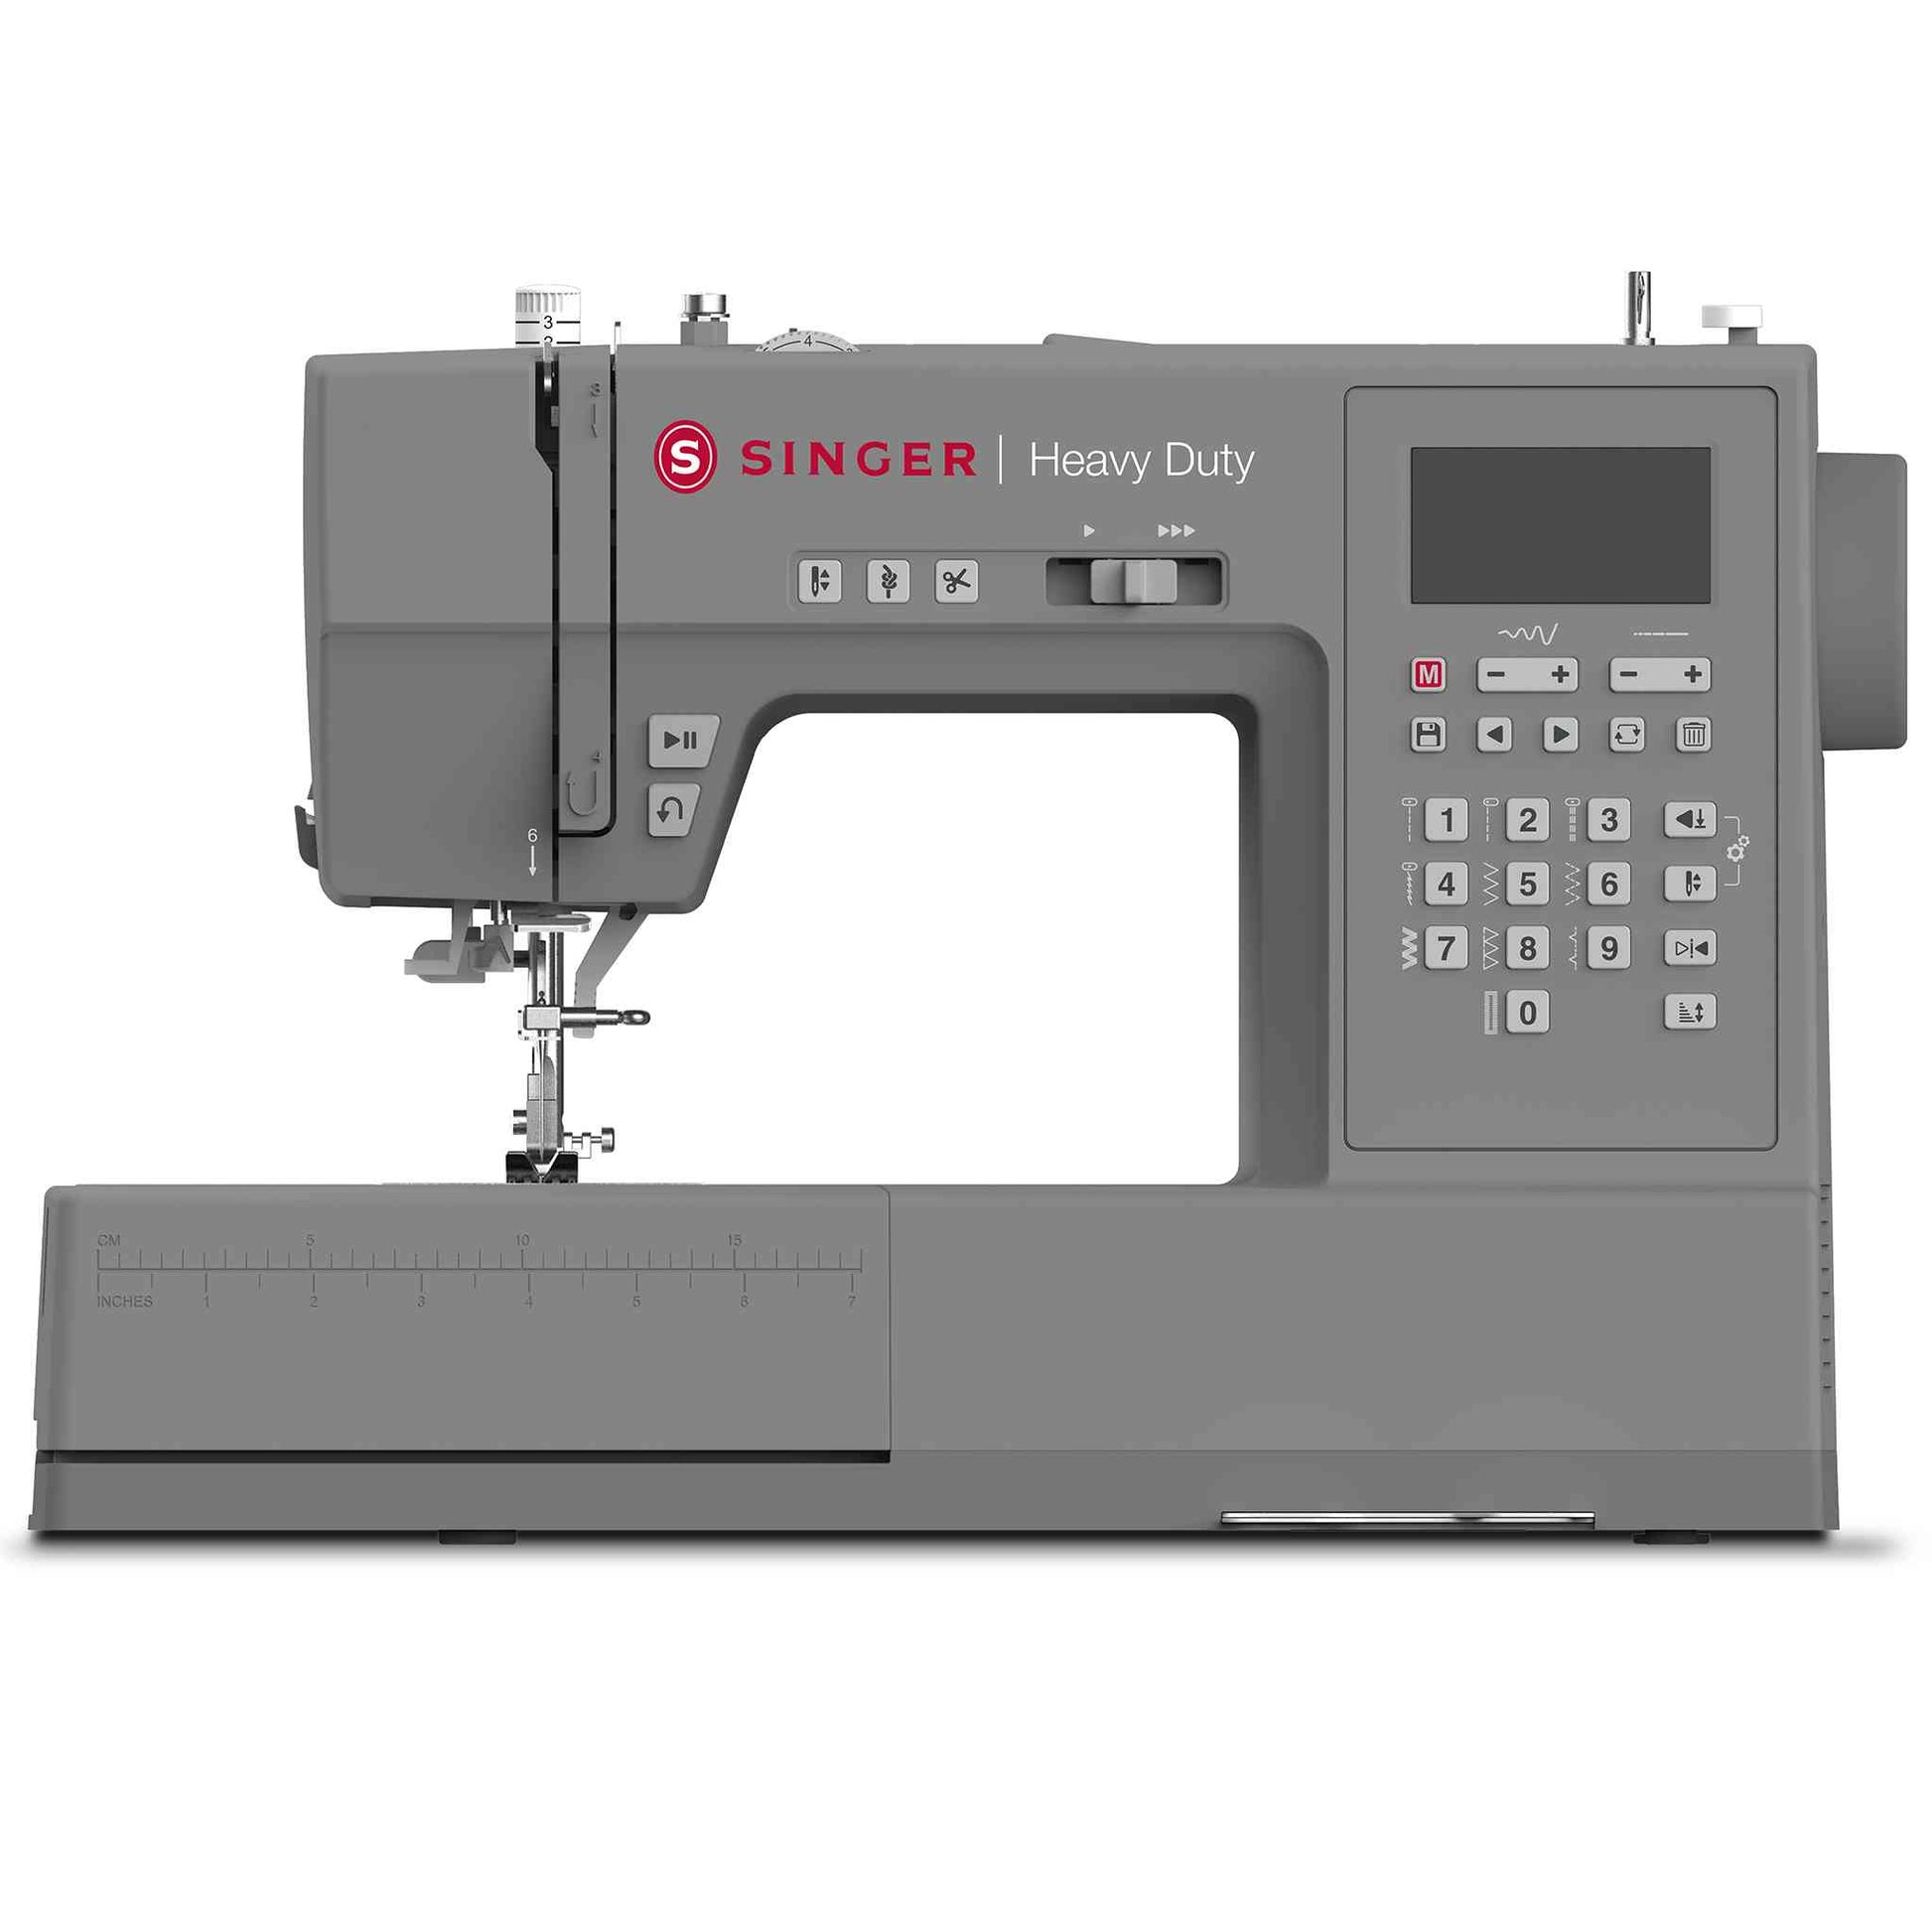 Singer 4432 Heavy Duty Review: Best Sewing Machine for Home Use 